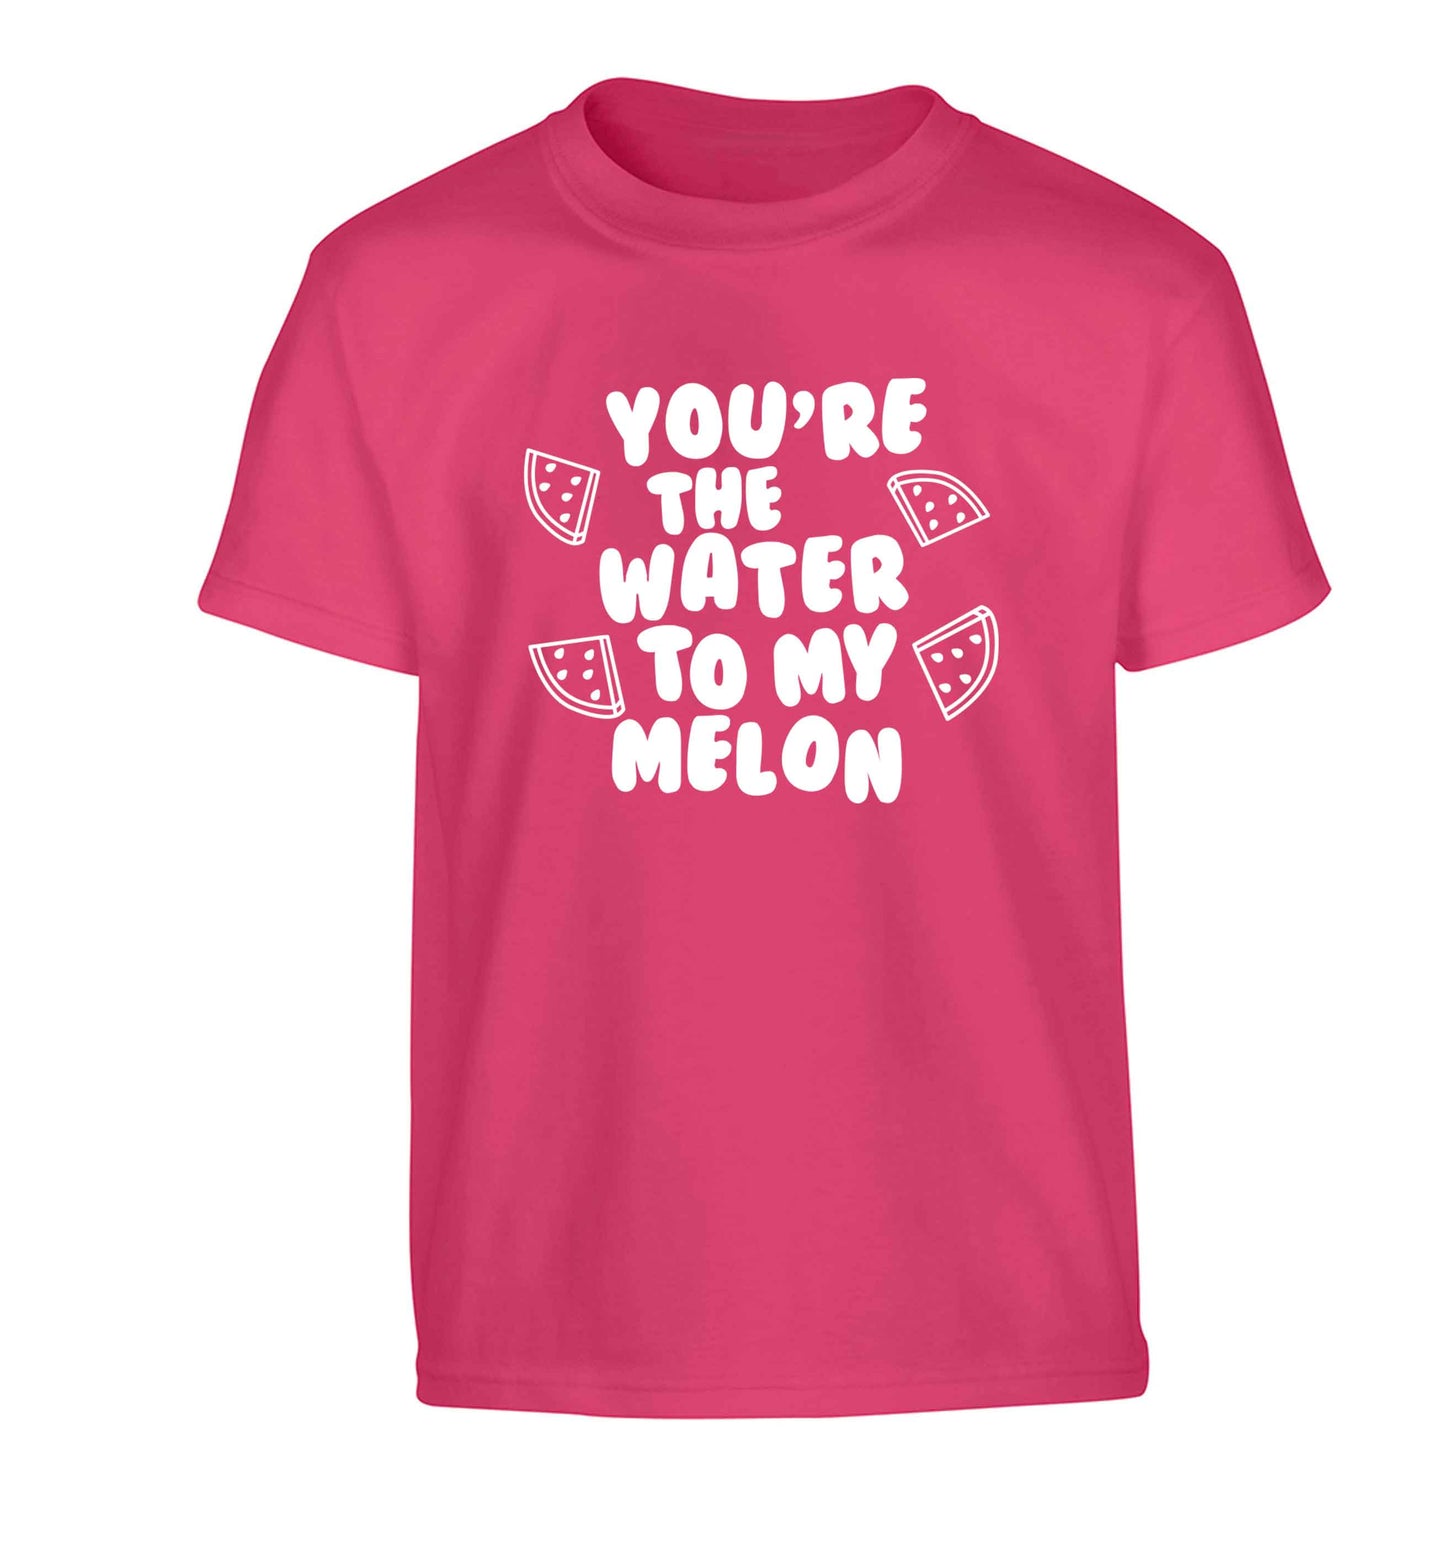 You're the water to my melon Children's pink Tshirt 12-13 Years